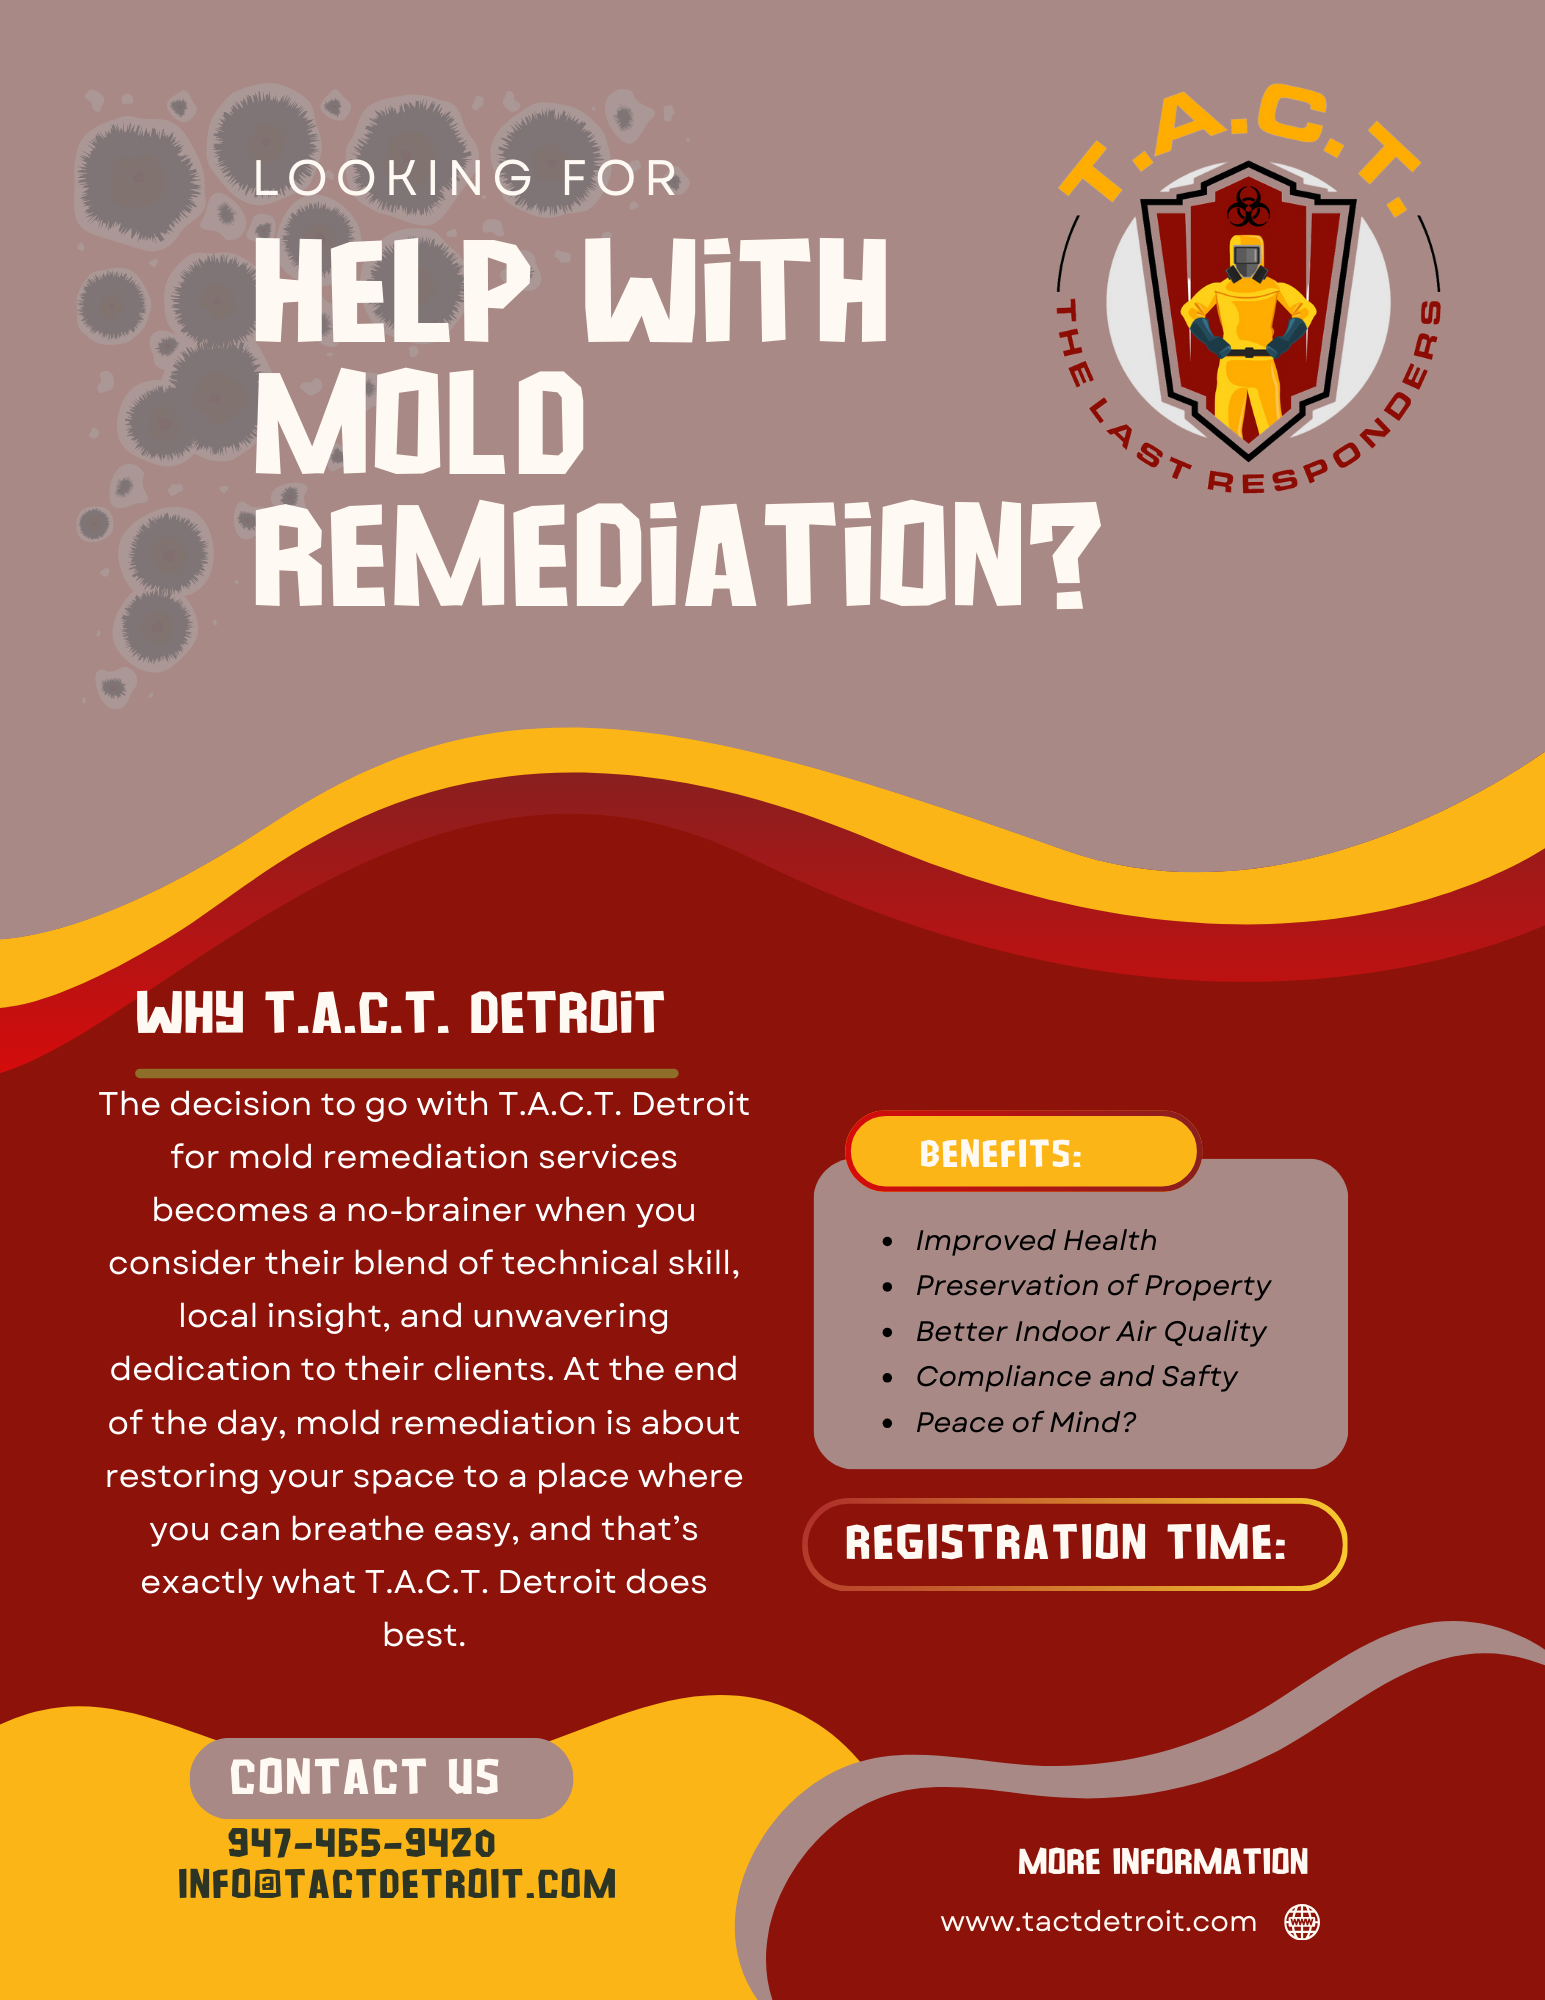 Why Choose T.A.C.T. Detroit for Mold Remediation Services in Michigan